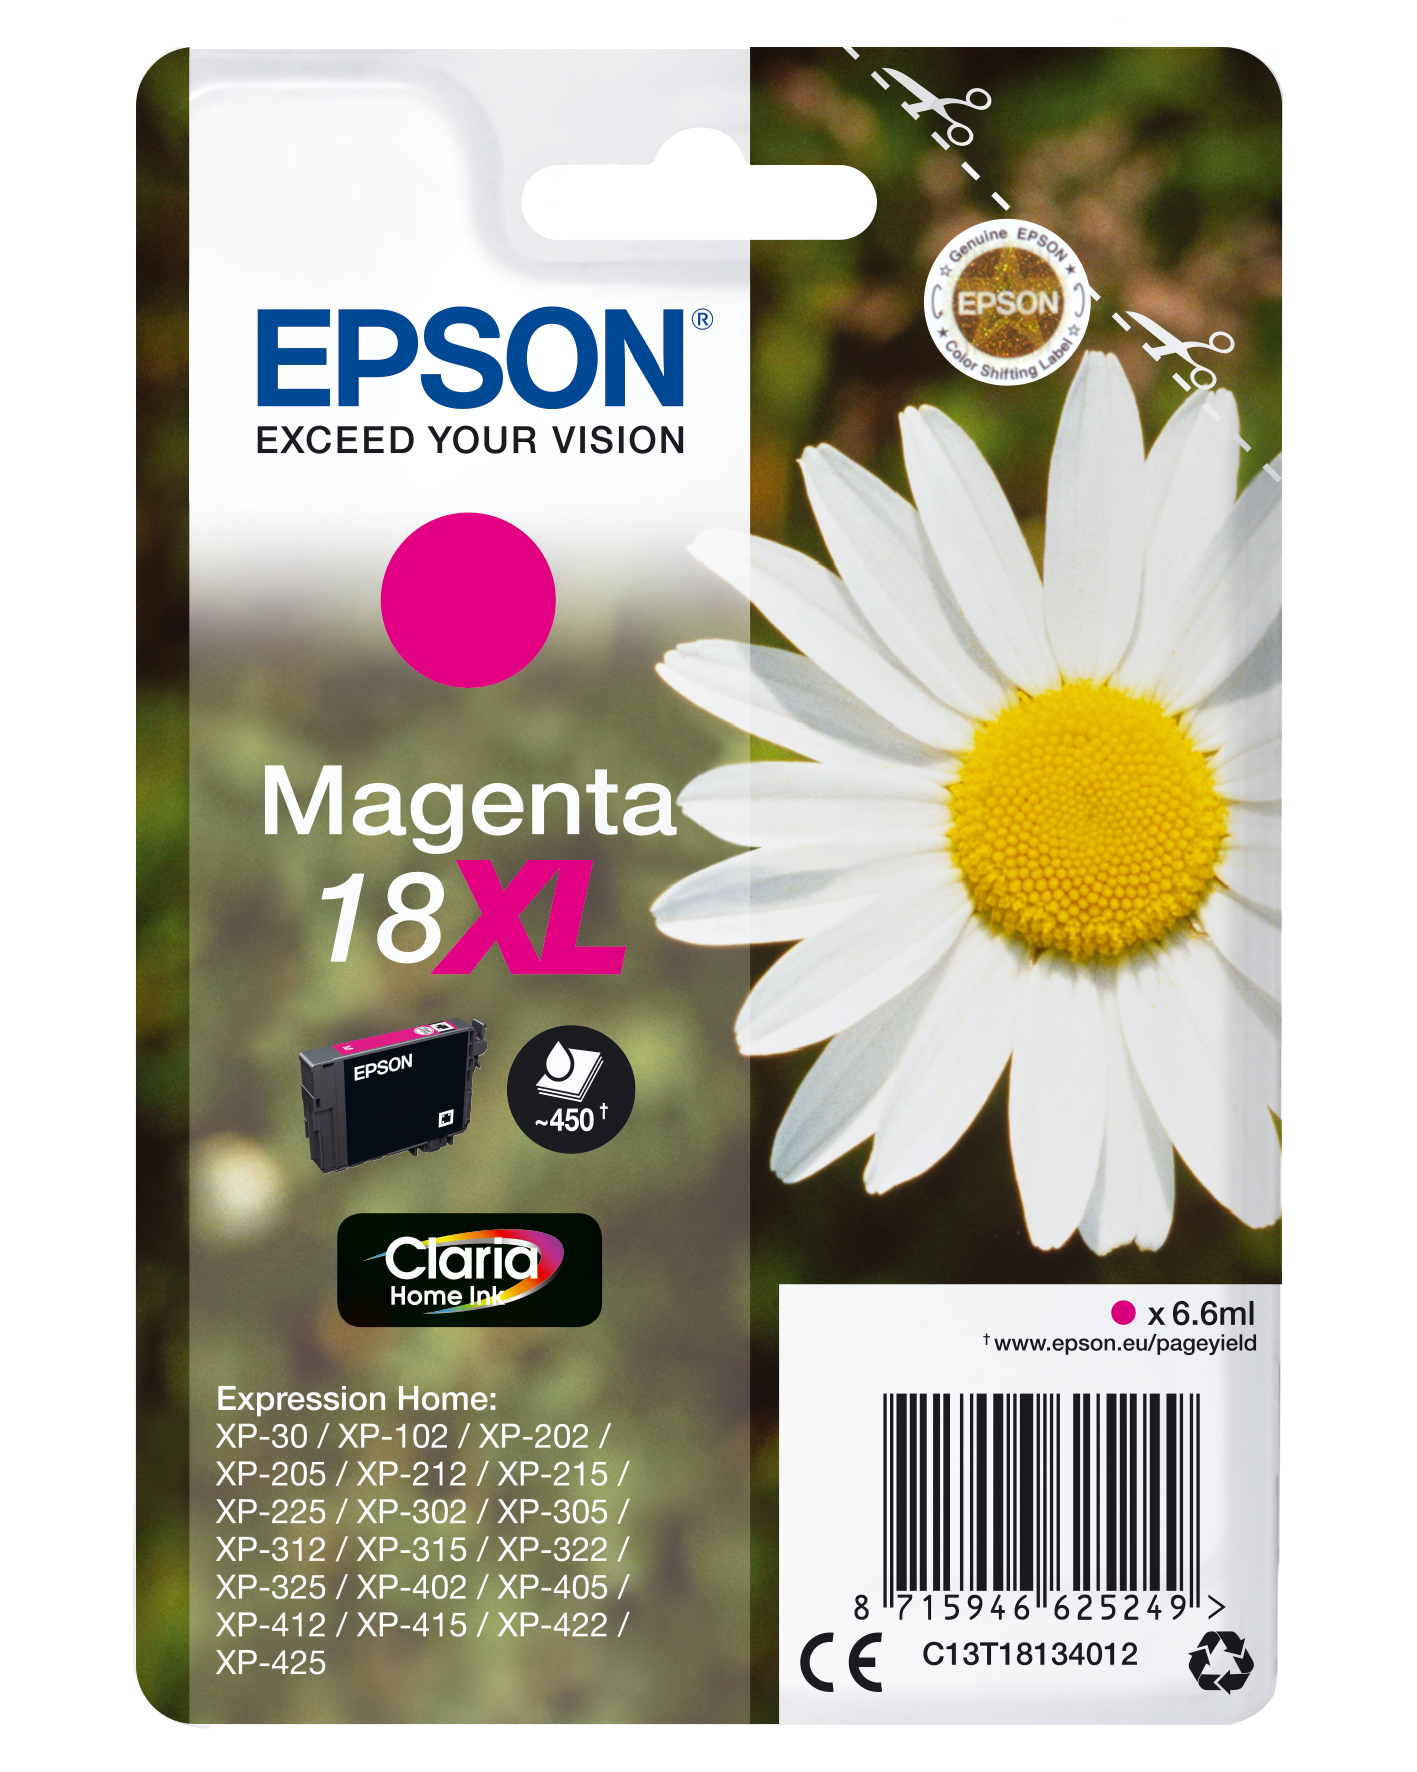 Epson Daisy Claria Home Ink-reeks single pack / magenta